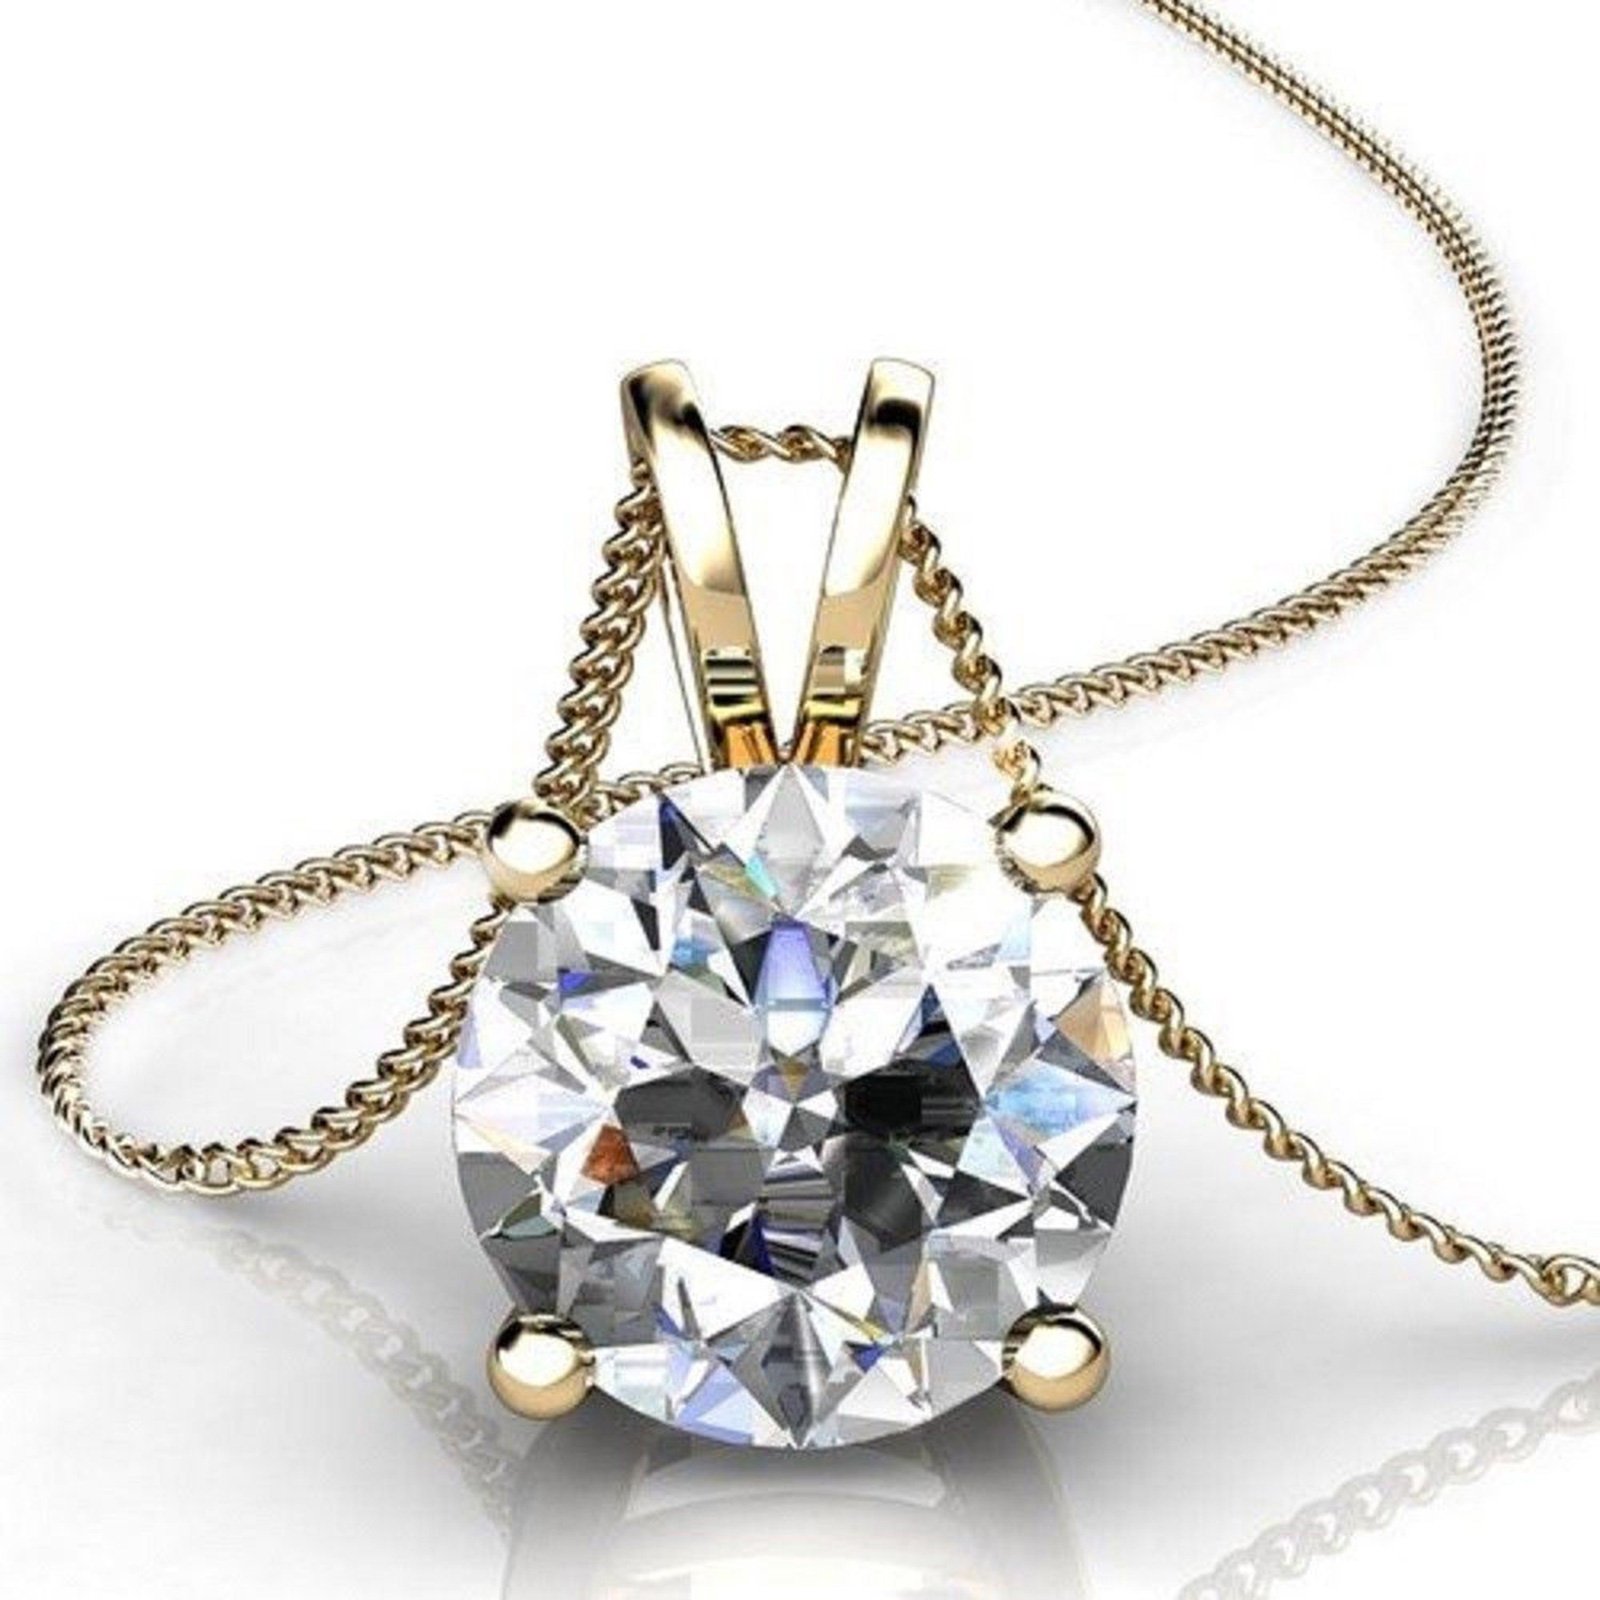 3.0 ct Brilliant Round Cut Solitaire Necklace - Genuine Moissanite Jewelry VVS1 D - Simulated Diamond Solitaire Pendant Necklace for Women with 18